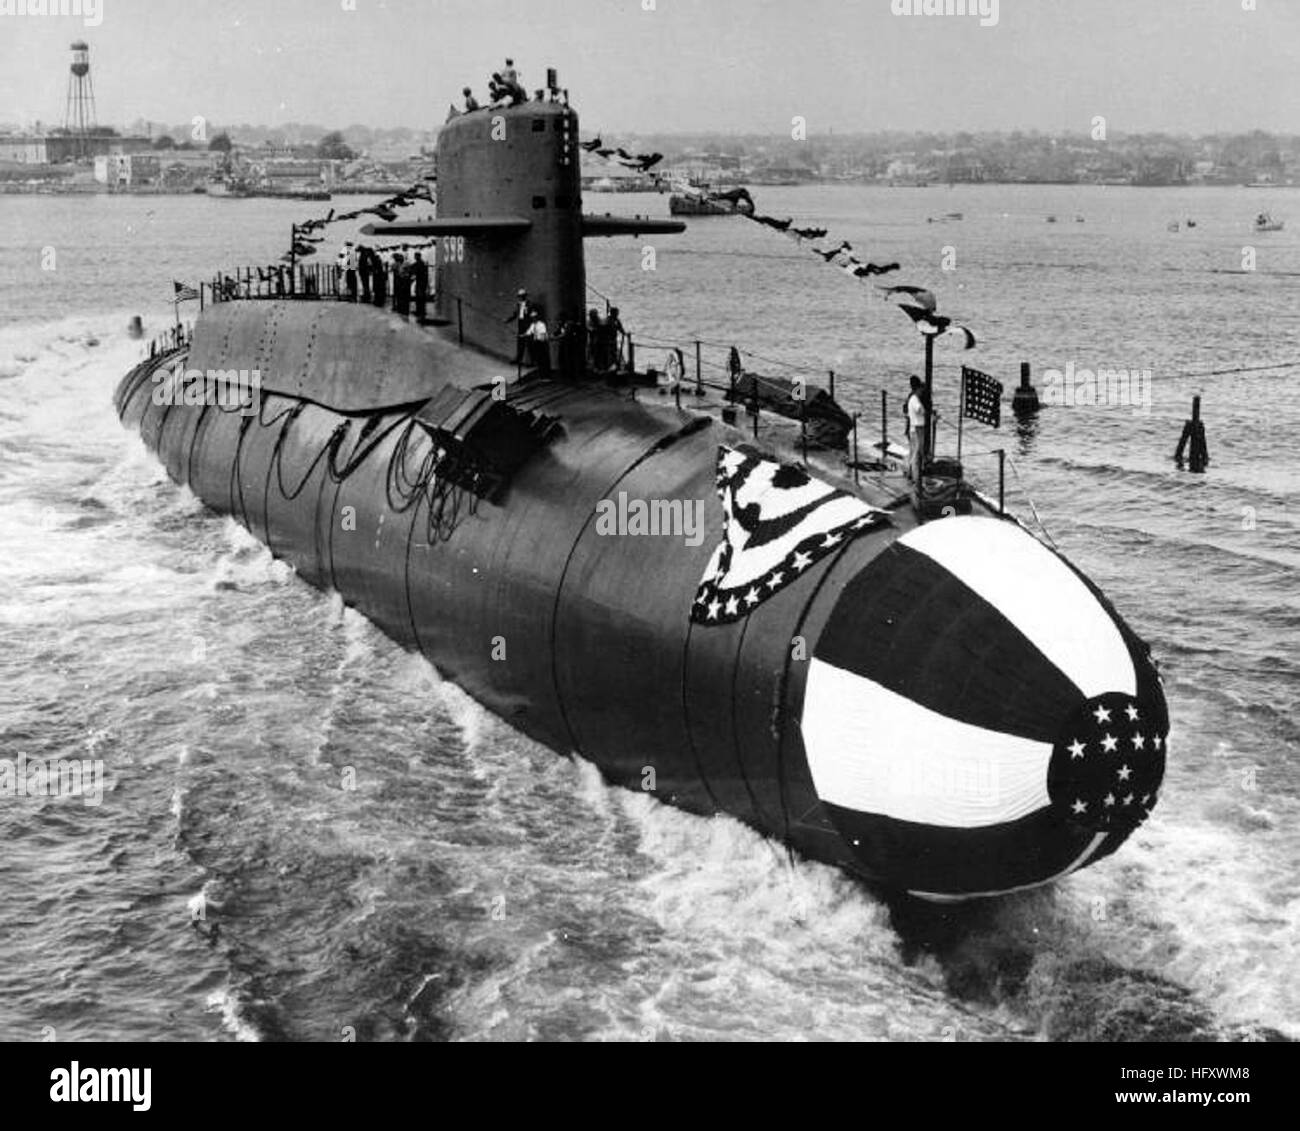 Uss Scorpion High Resolution Stock Photography and Images - Alamy